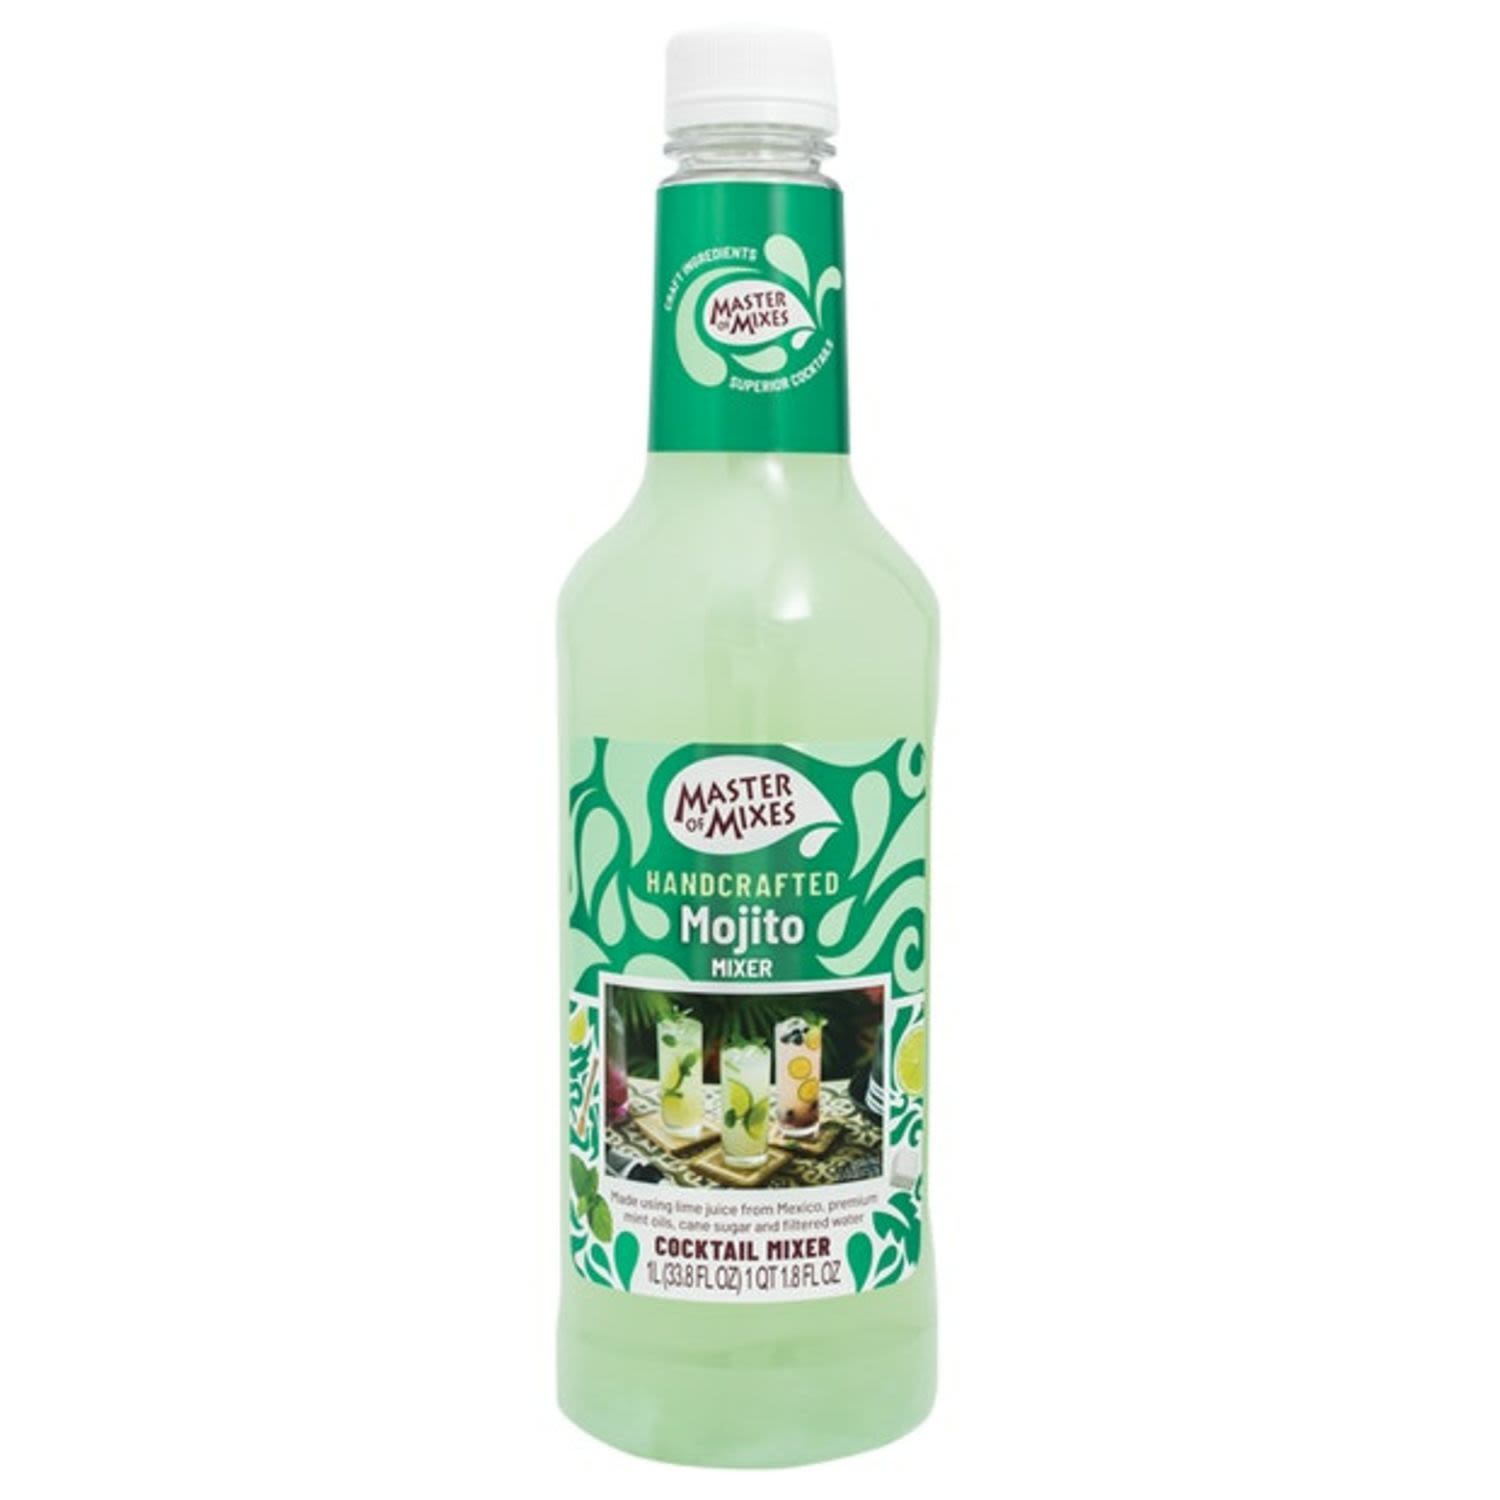 Master of Mixes Mojito Mix was crafted using scratch ingredients such as mint oils, cane sugar and lime juice to give you a perfectly blended mojito mix. Simply add light rum and club soda and Salud!<br /> <br />Pack Format: Bottle<br /><br />Pack Type: Bottle<br />